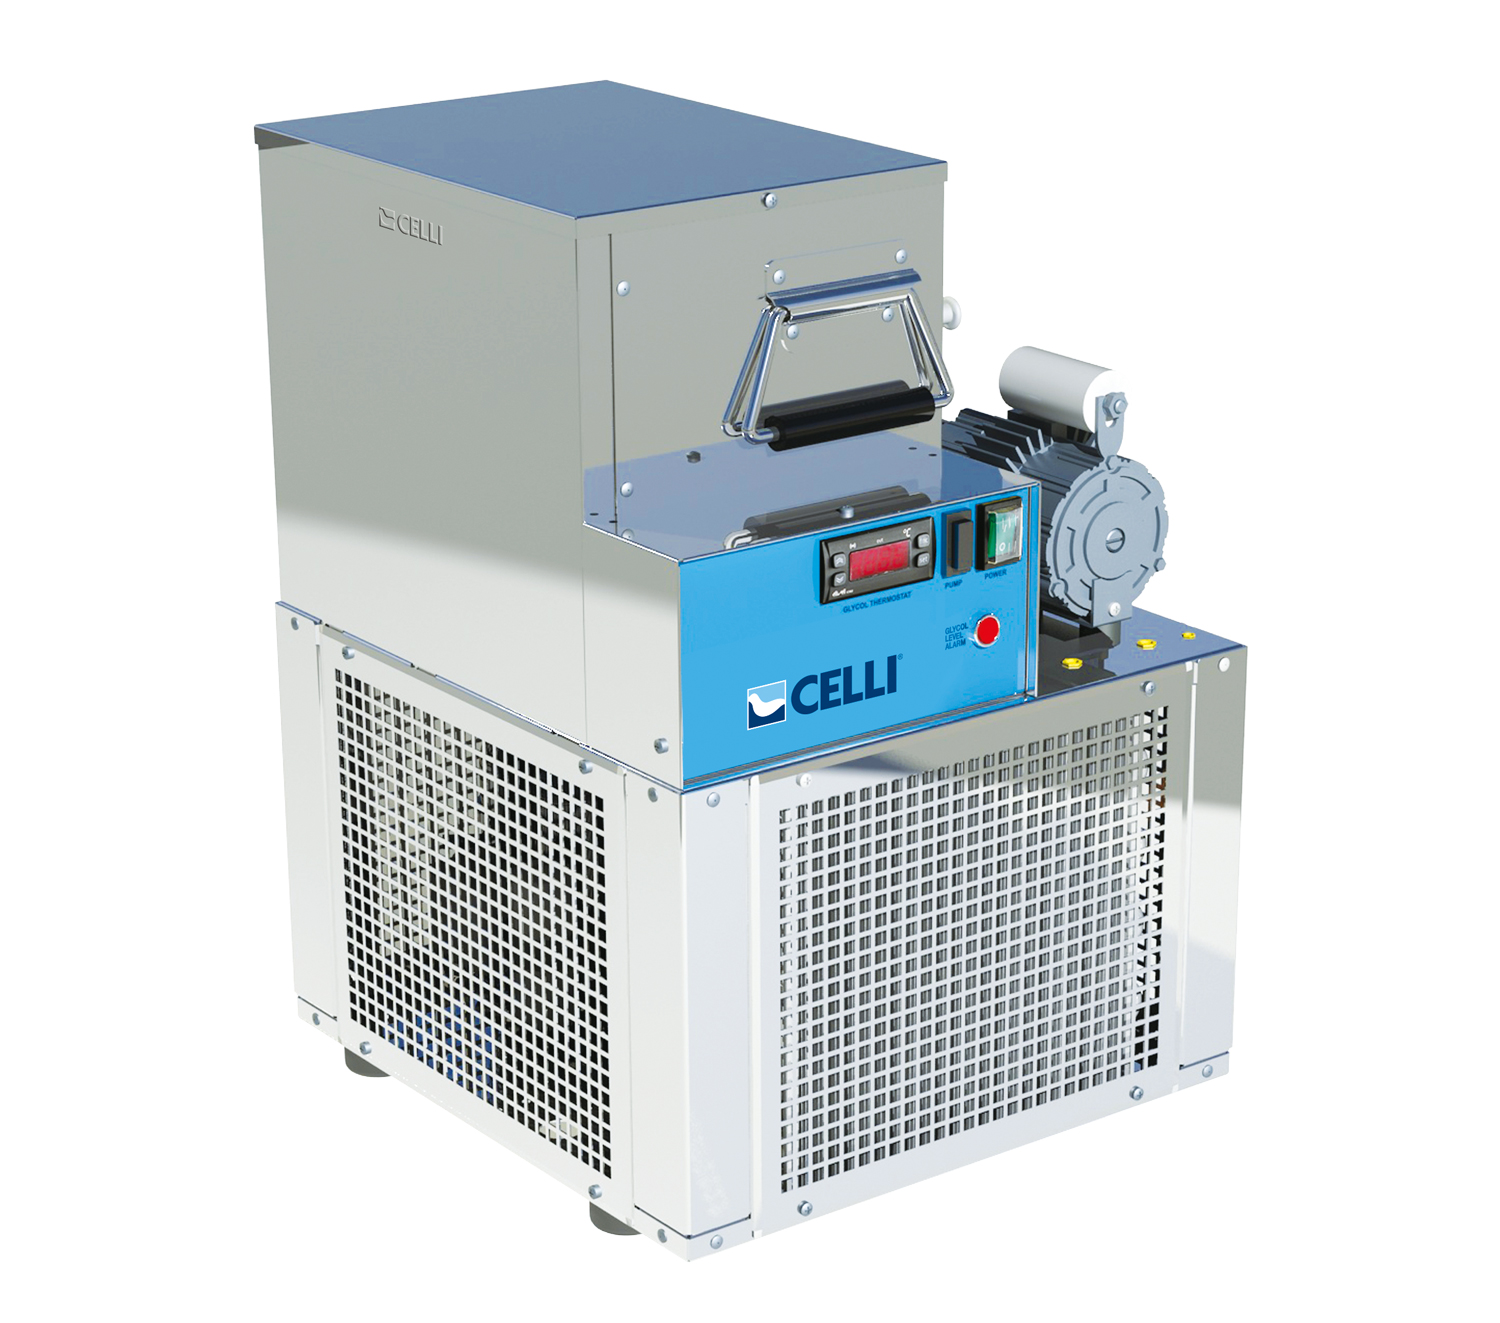 CELLI Blizzard Glycol - Glycol draft beer system